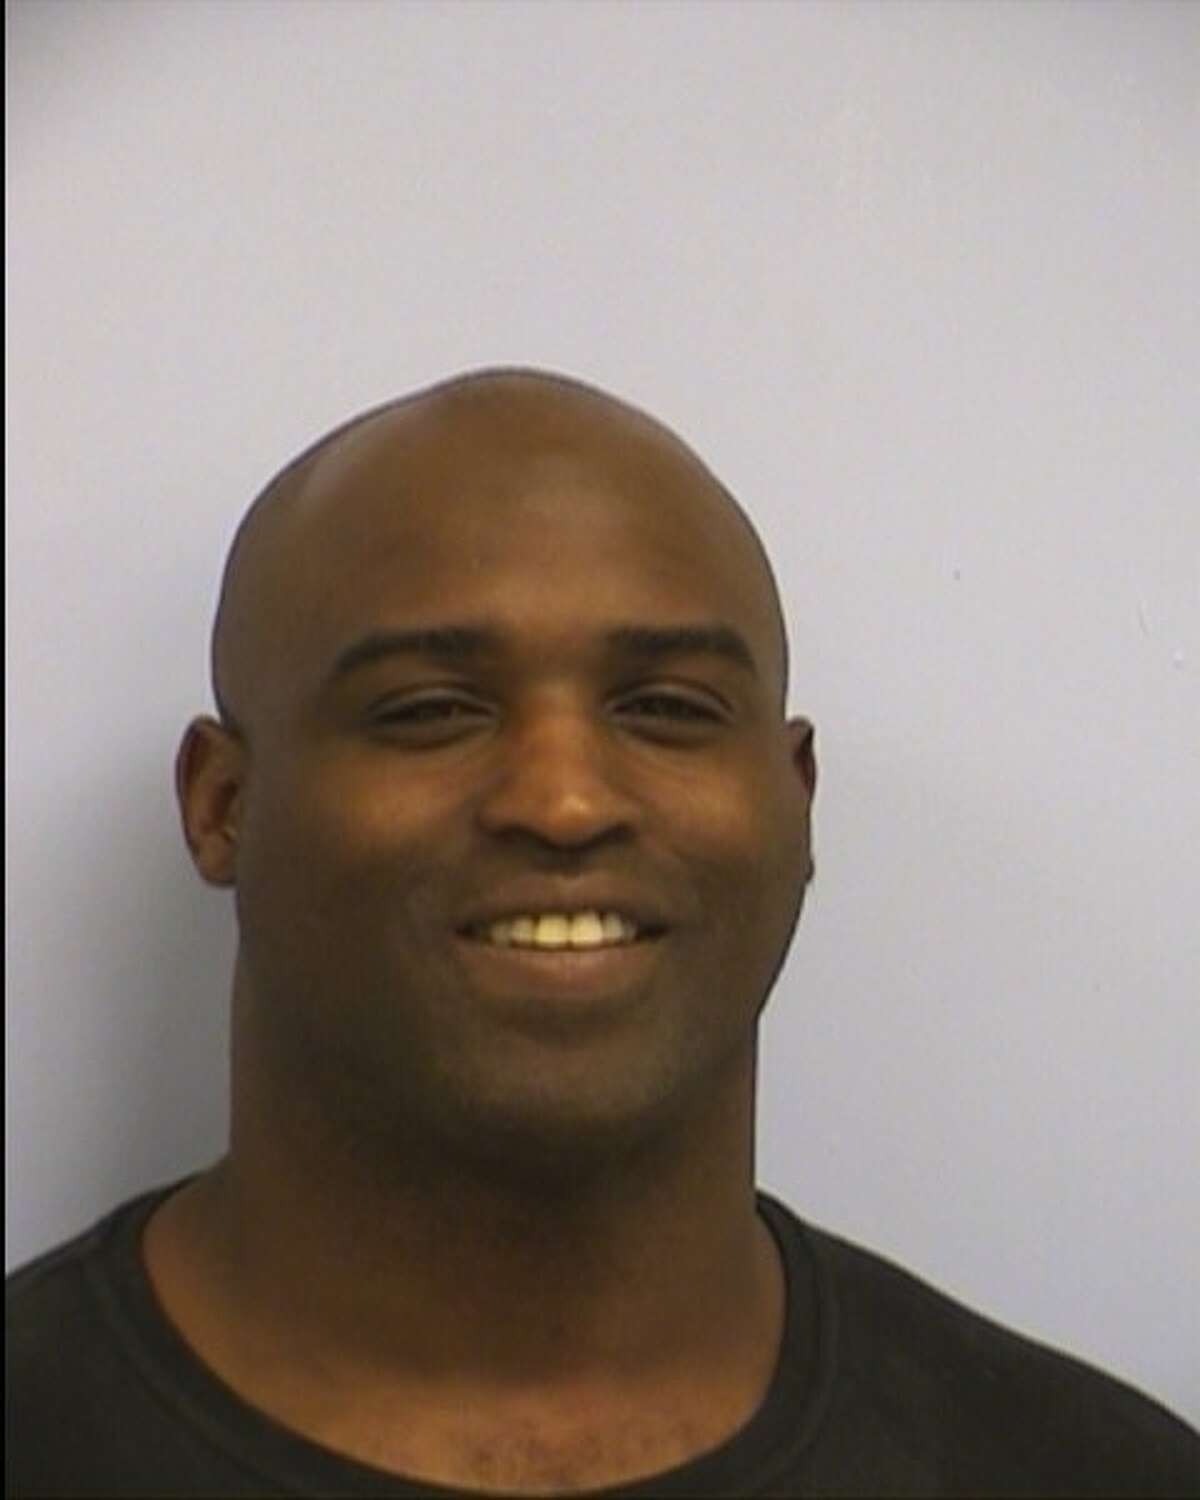 Former Longhorns running back Ricky Williams was arrested on Tuesday, Sept. 19, 2017, for traffic warrants.